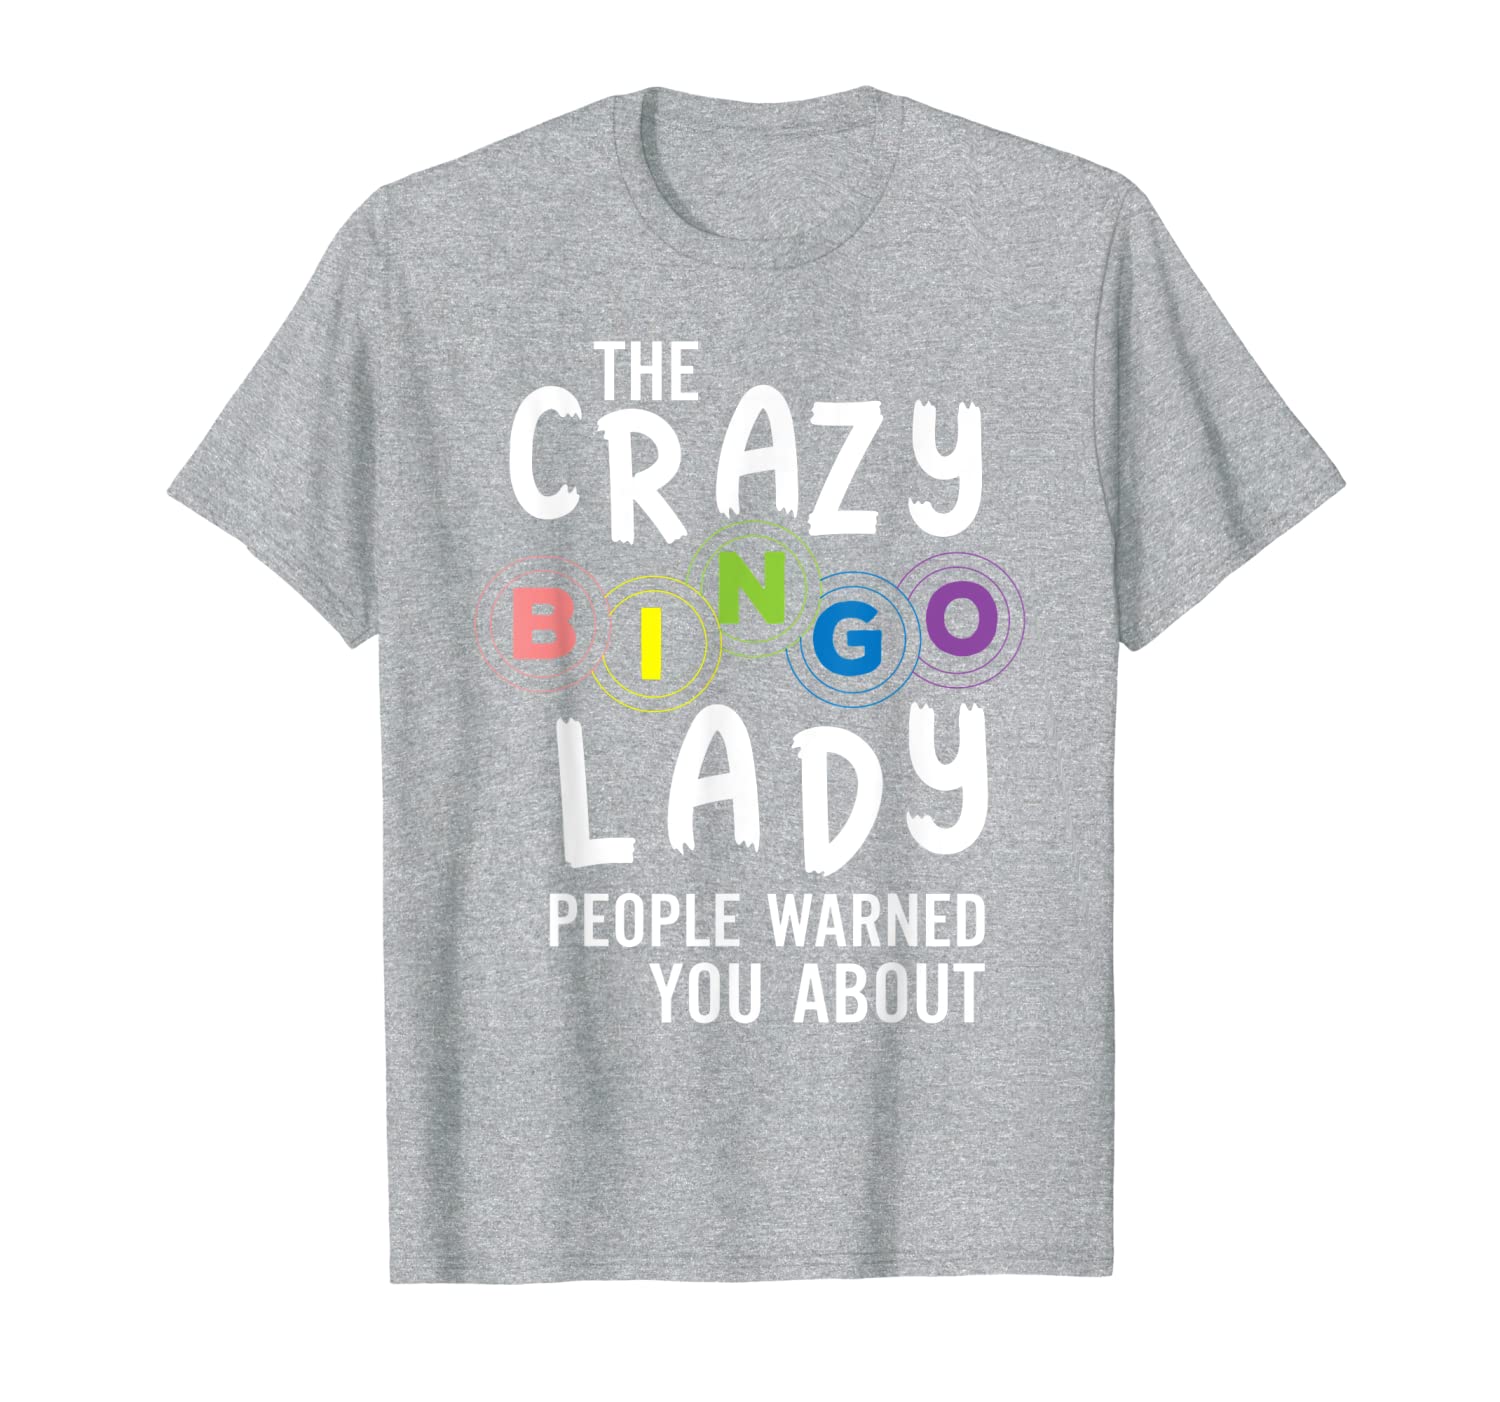 the crazy bingo lady people warned you about t-shirt, White;black.